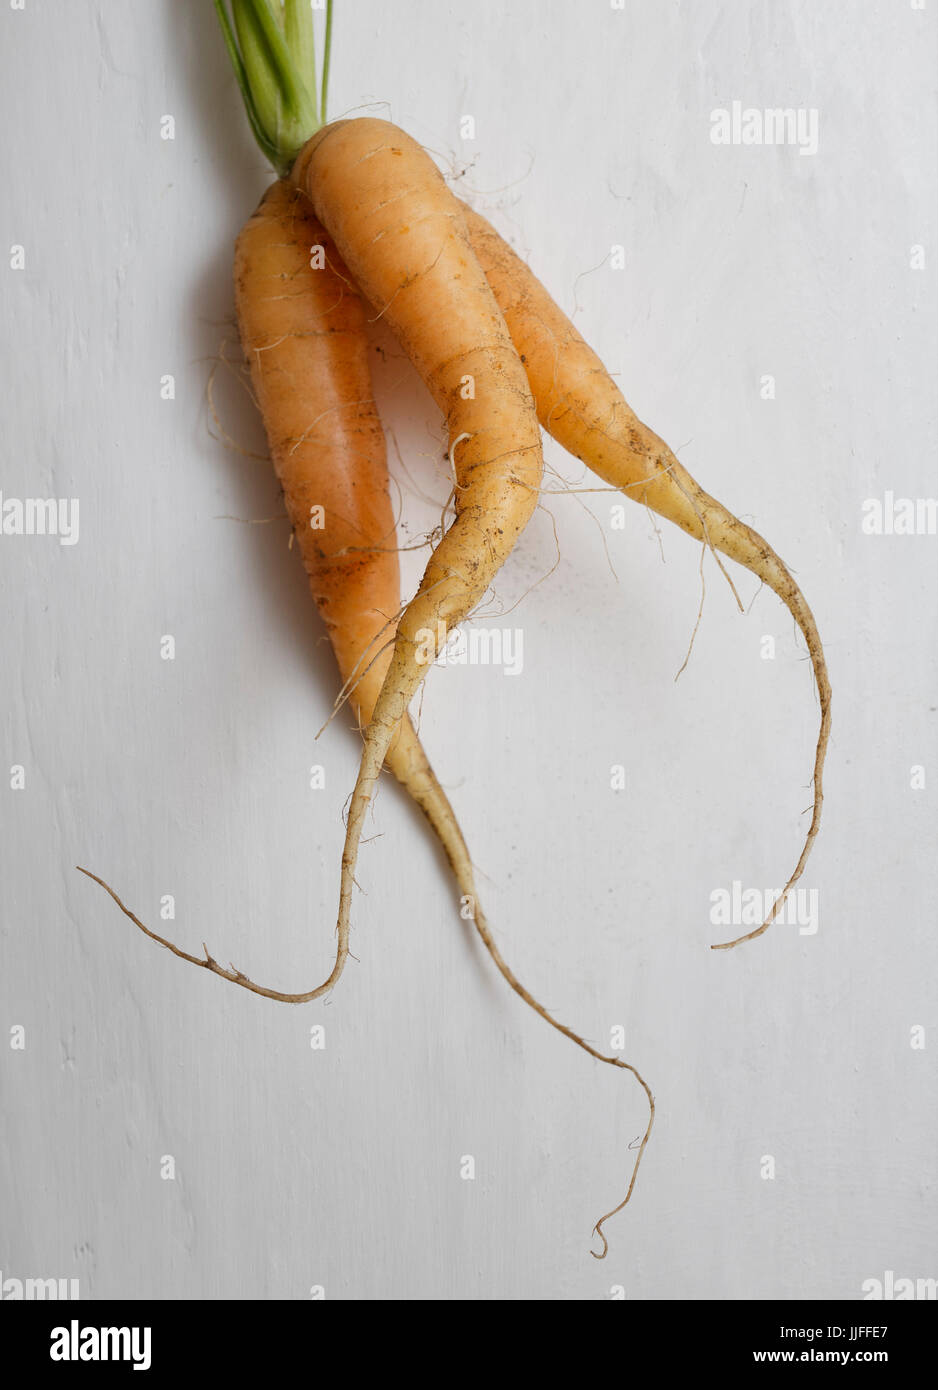 Wonky vegetable, reduce food waste. Recently harvested carrot(s) that has grown in an odd way. Stock Photo